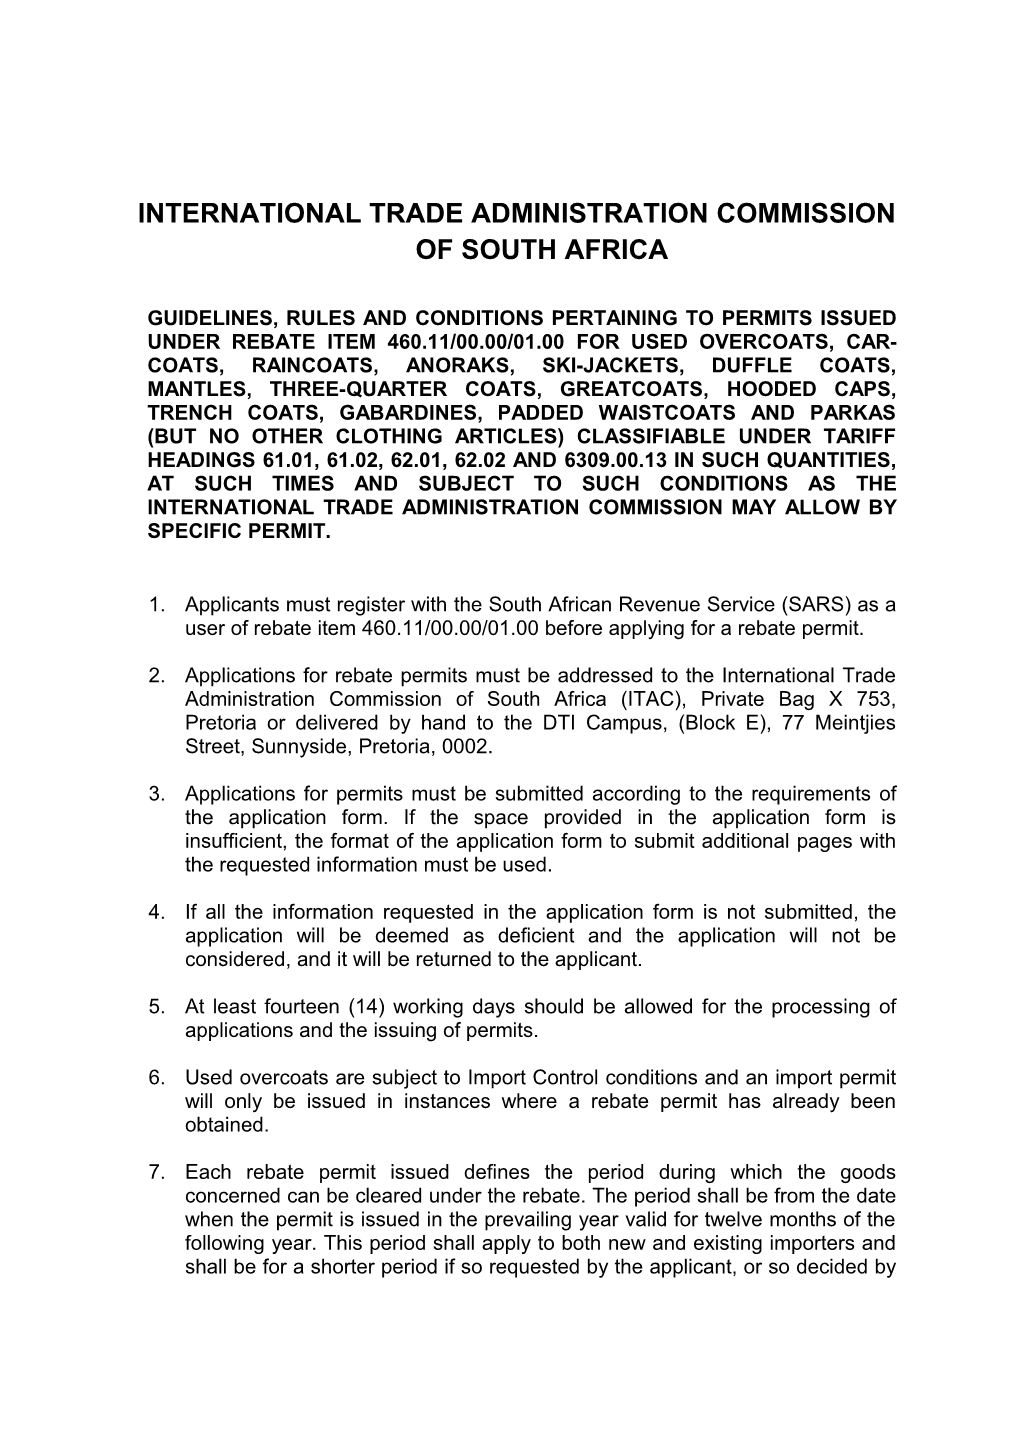 International Trade Administration Commission of South Africa